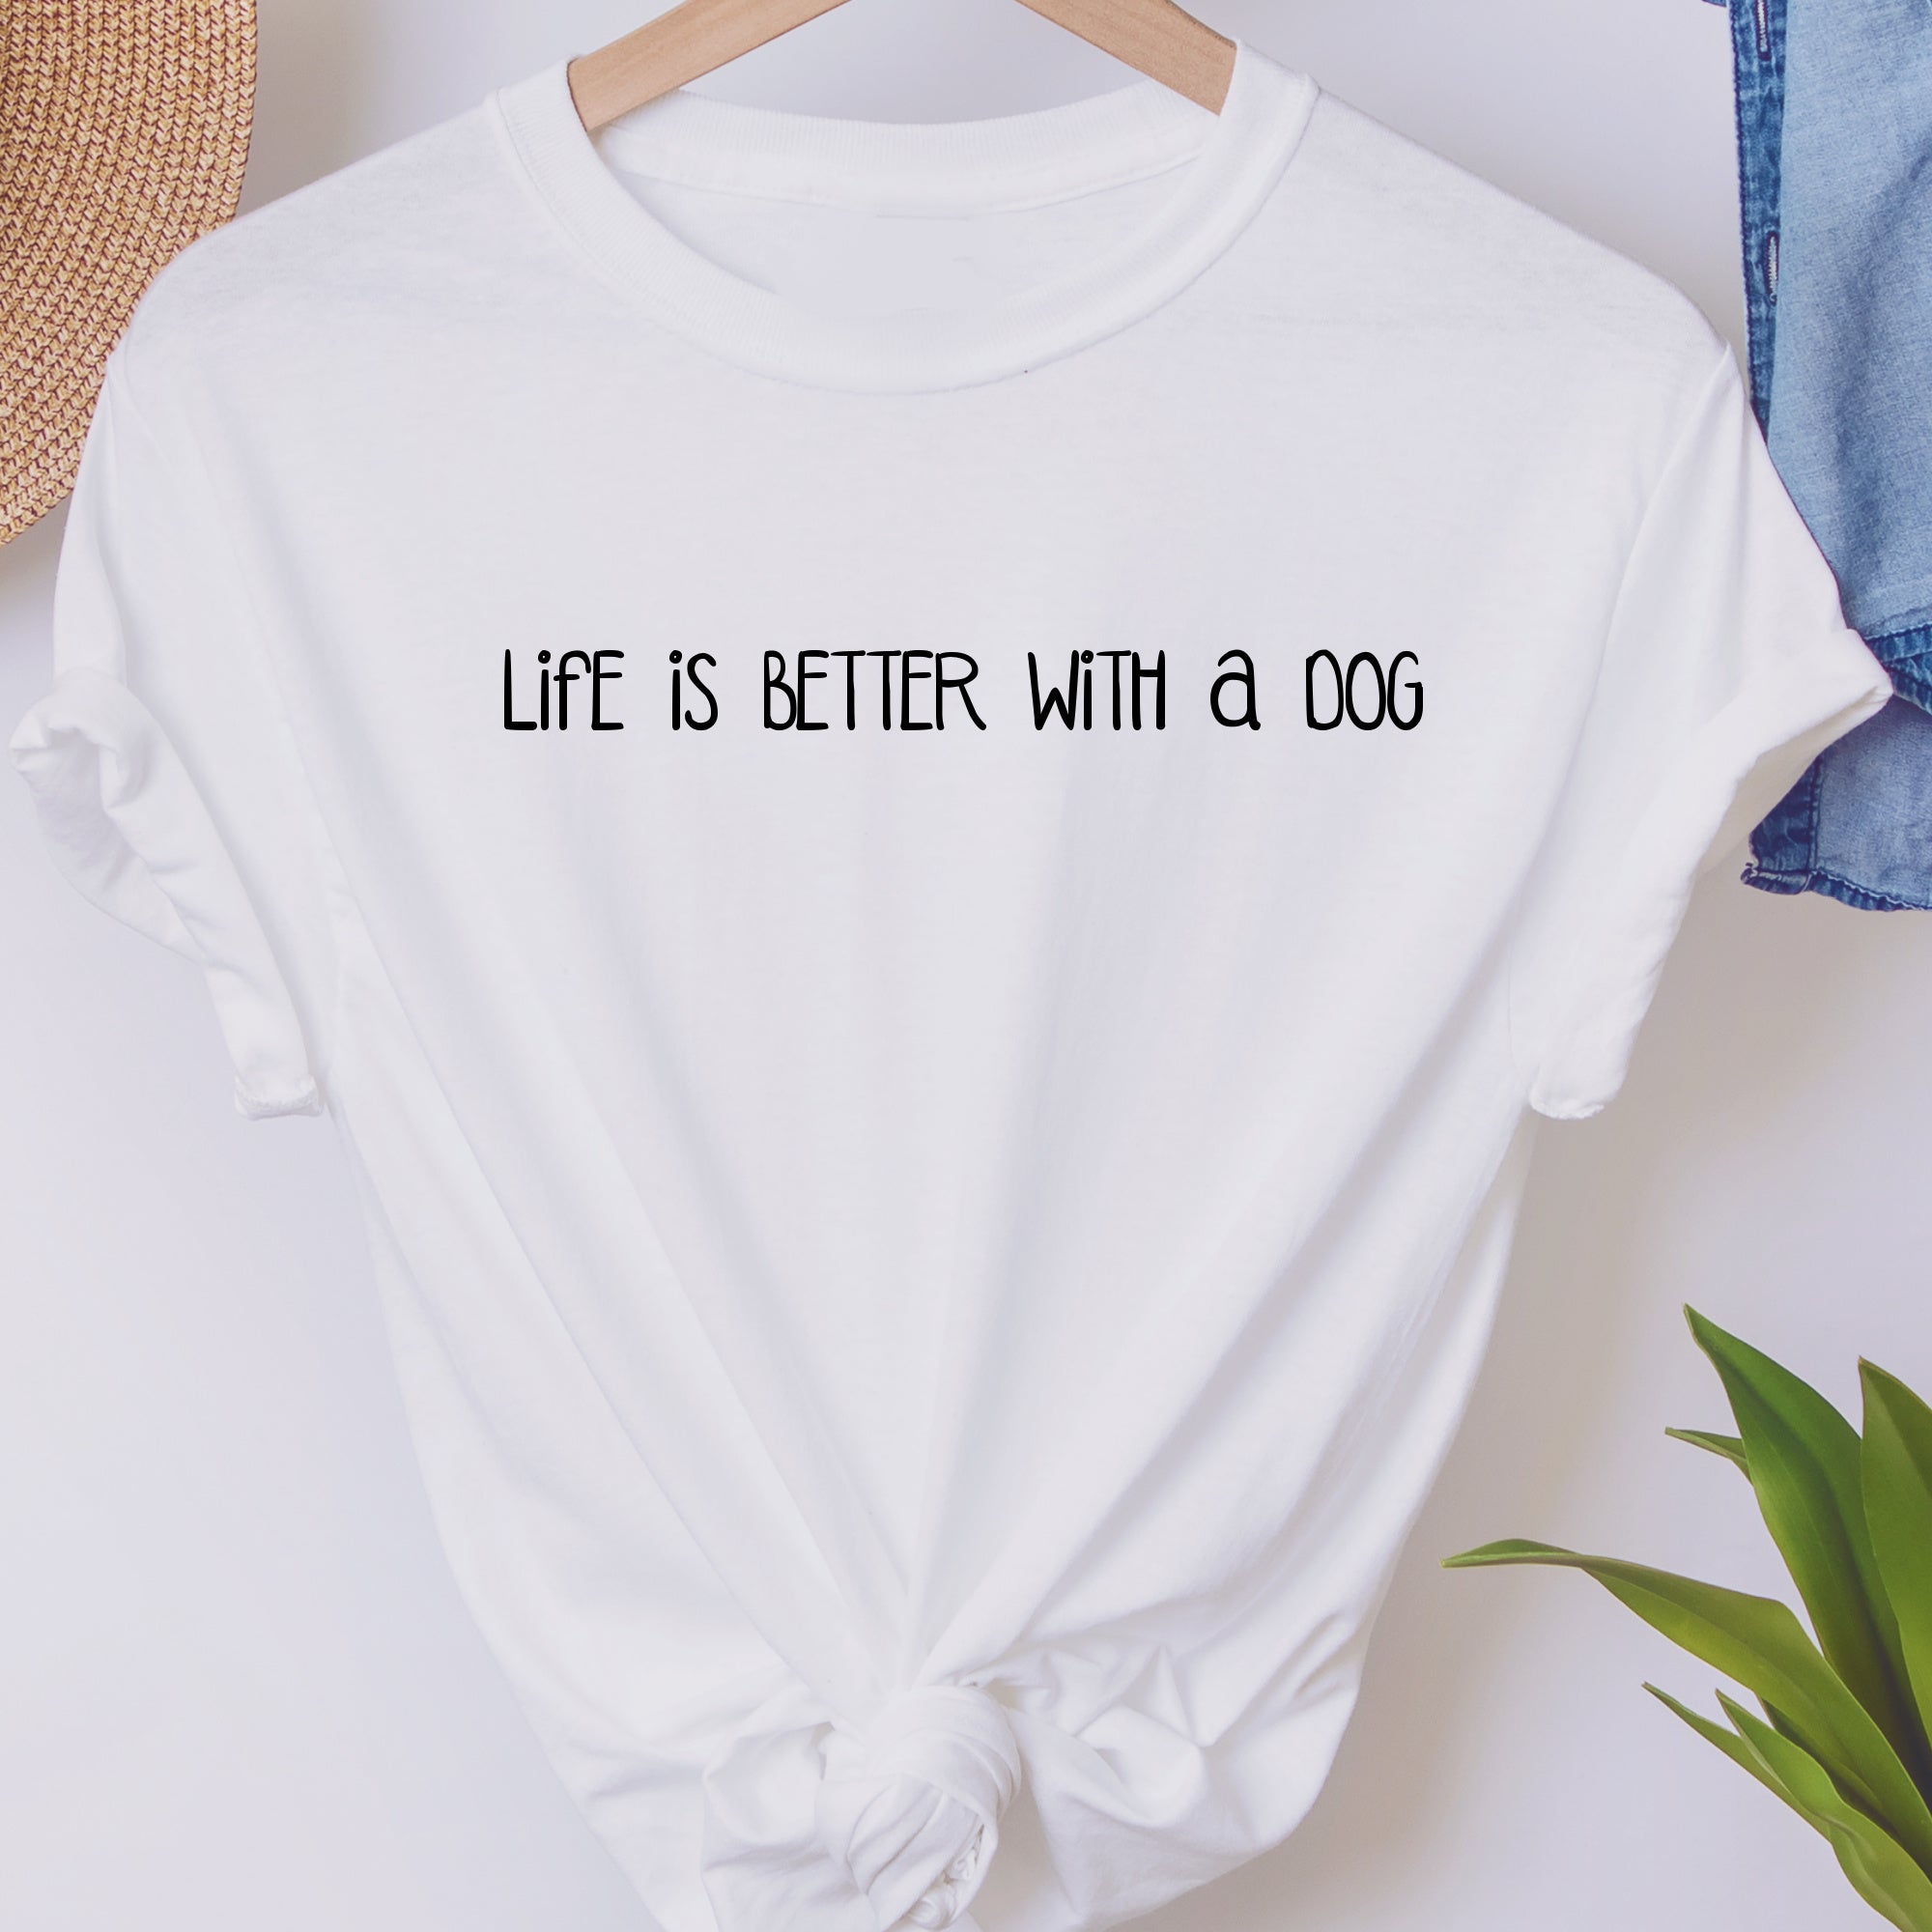 Life is Better with a Dog T-Shirt - Ladies Relaxed Fit